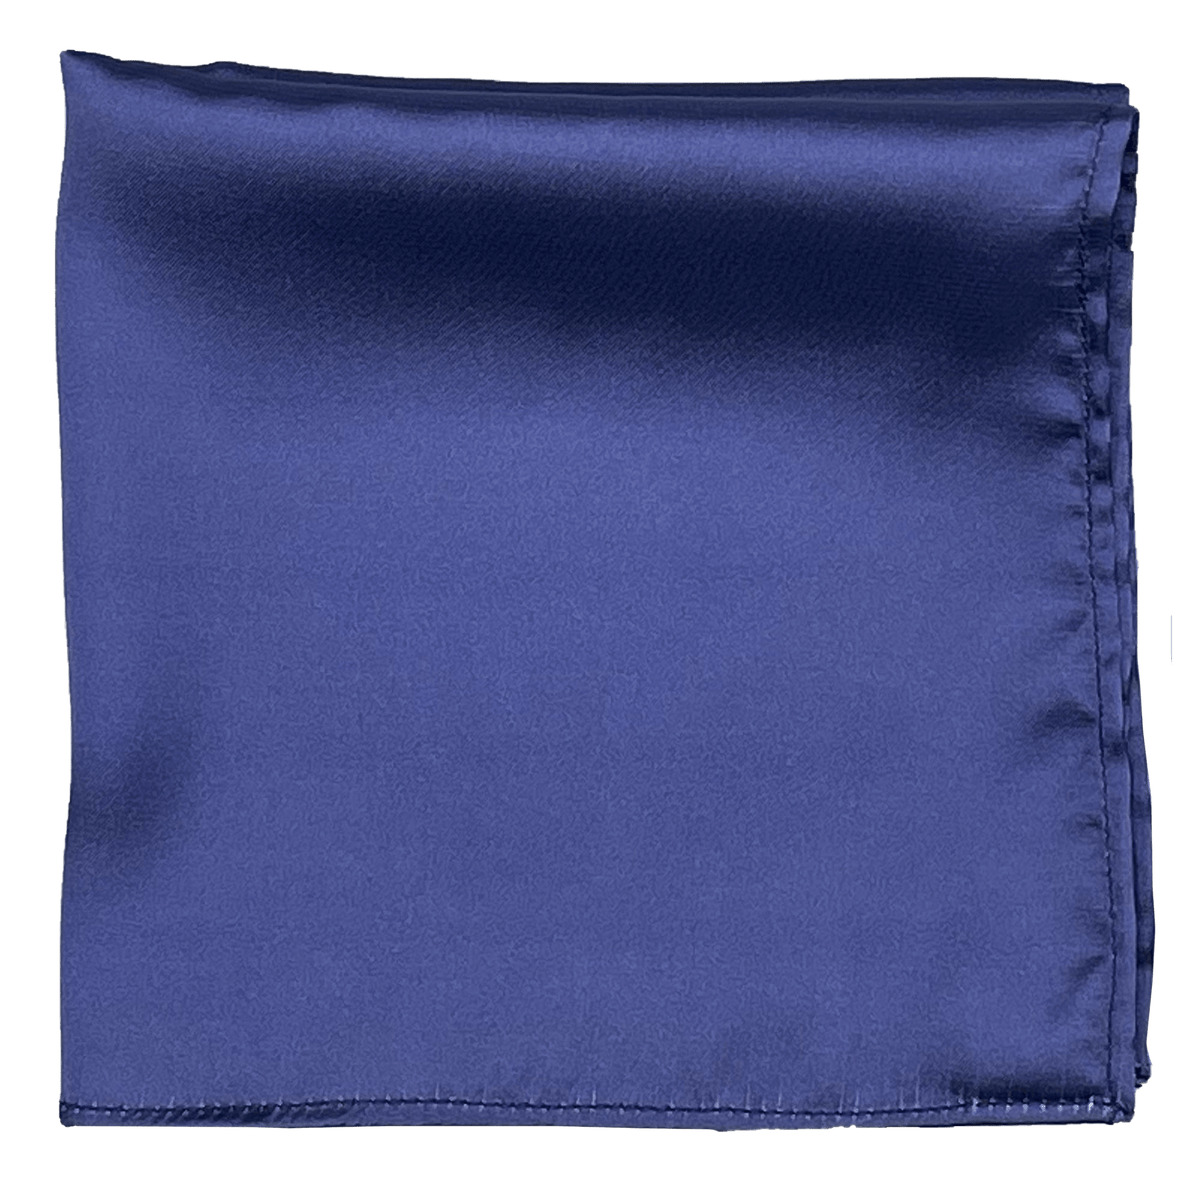 The Solid Blue Silk Pocket Square